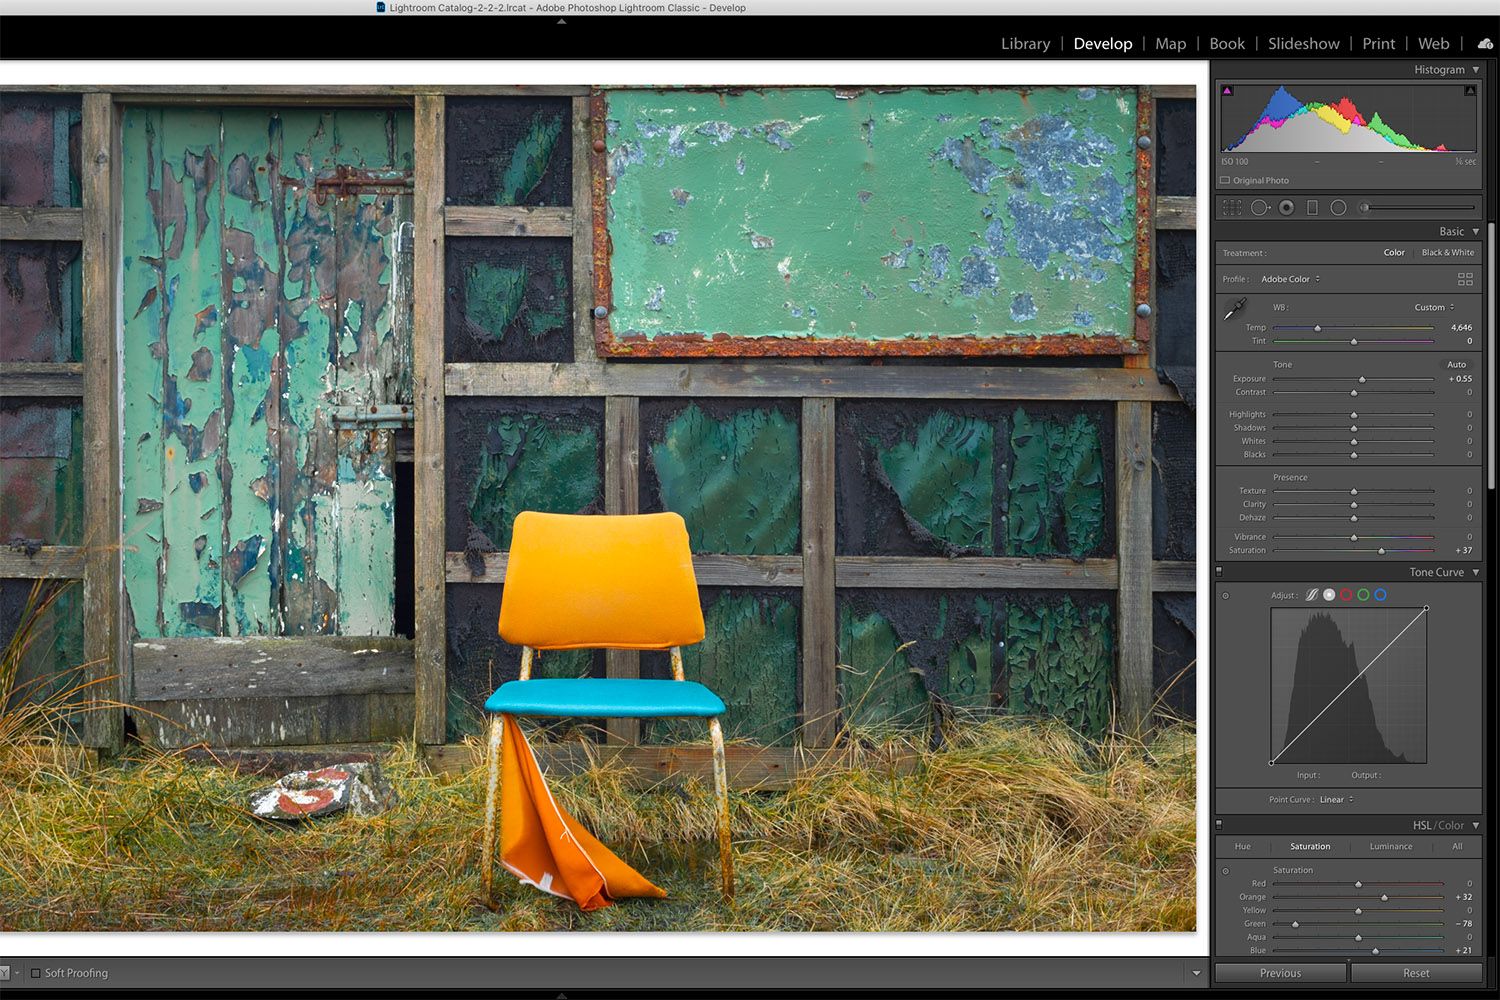 Video: New hue feature in Lightroom Classic